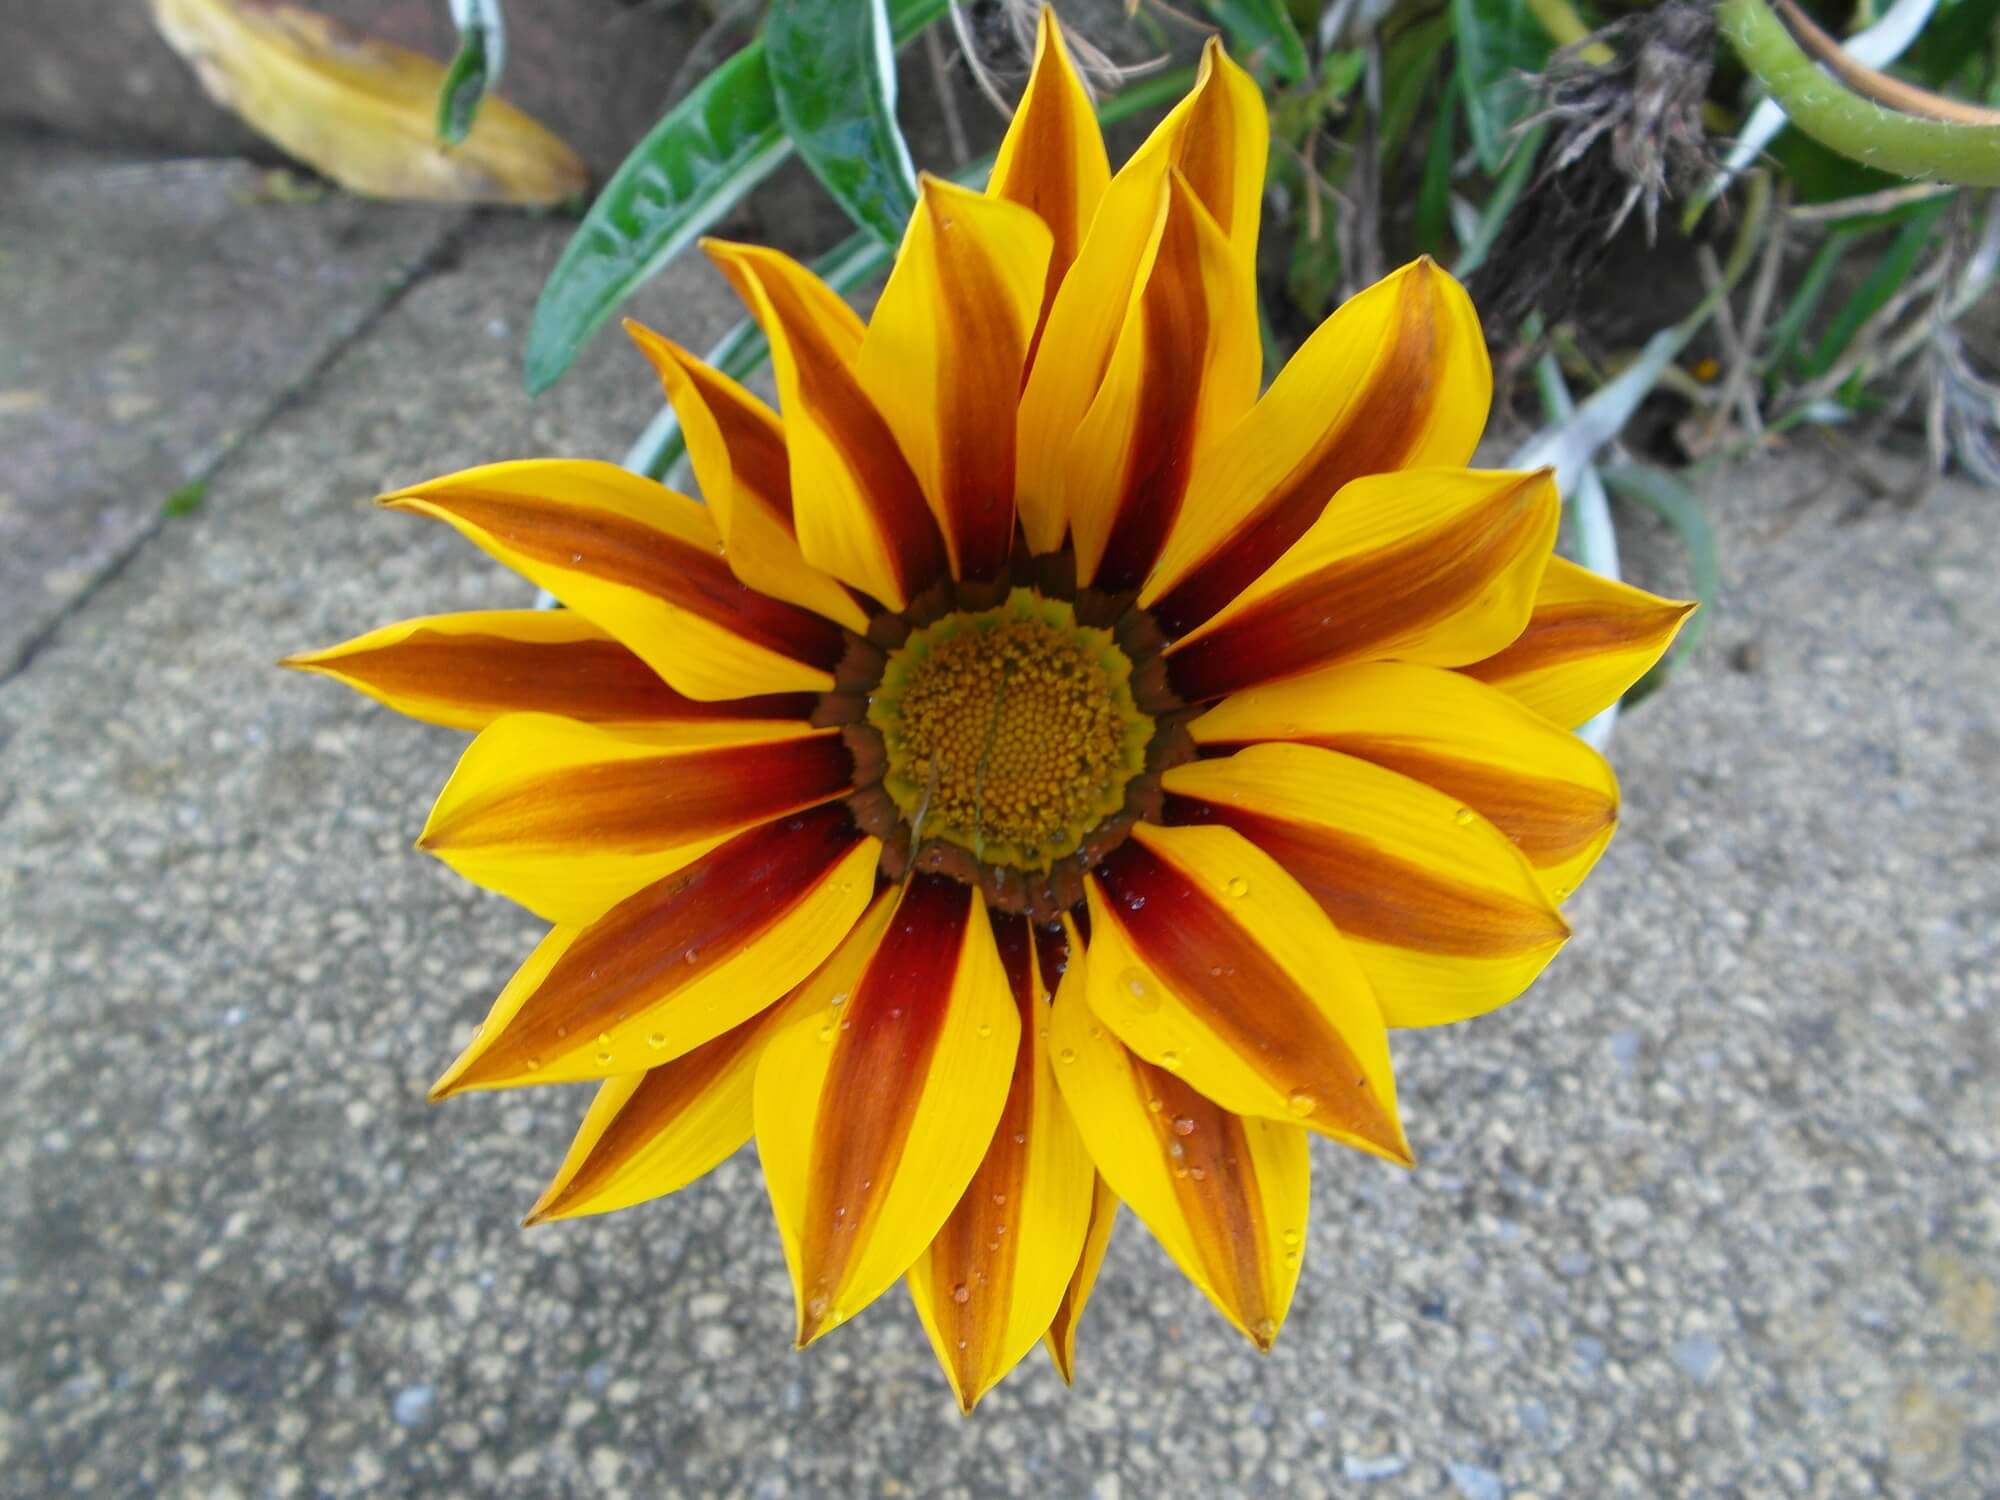 This beautiful Gazania is growing blooming marvelously in Summer Gardens